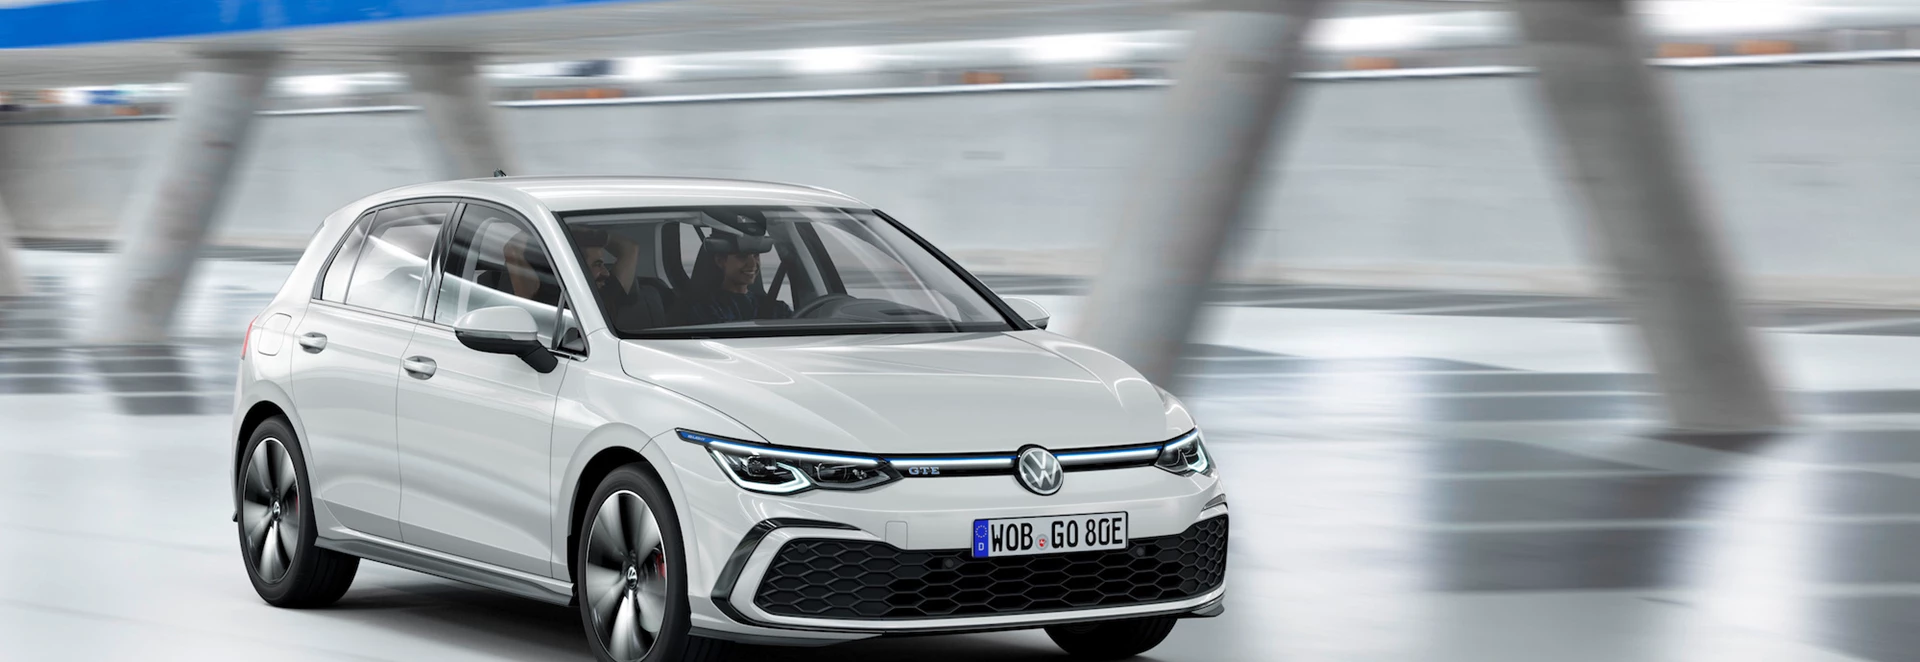 7 electric/hybrid cars to consider in 2020 